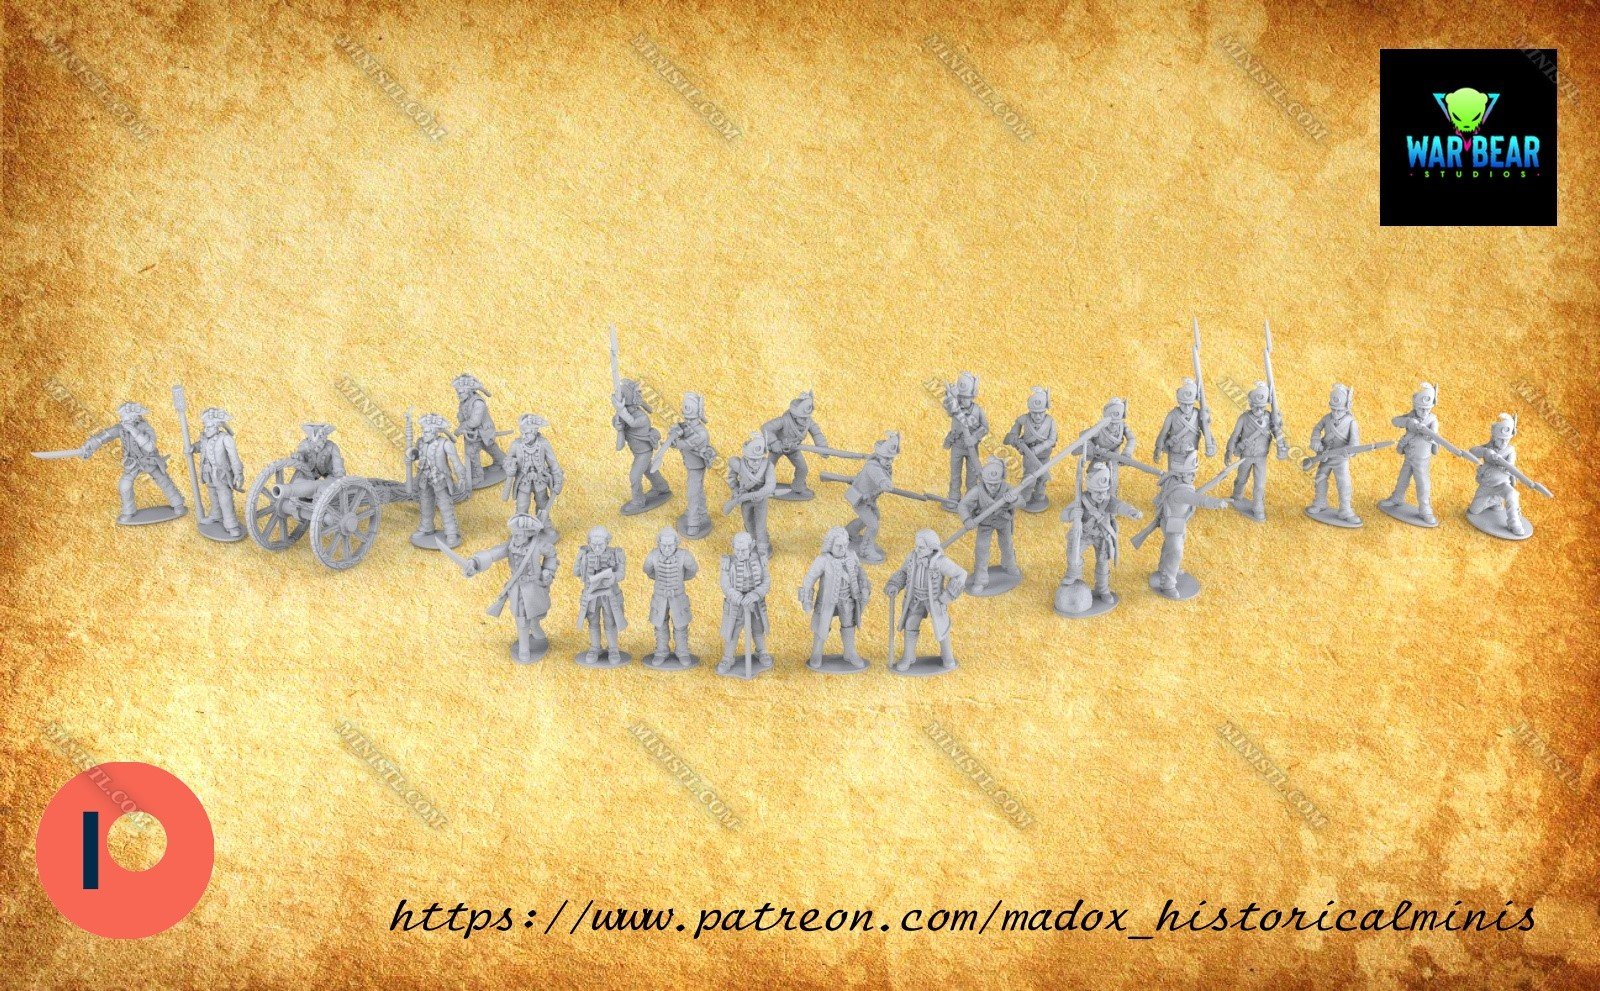 Madox Historical miniatures October 2022 Madox Historical Miniatures  MINISTL